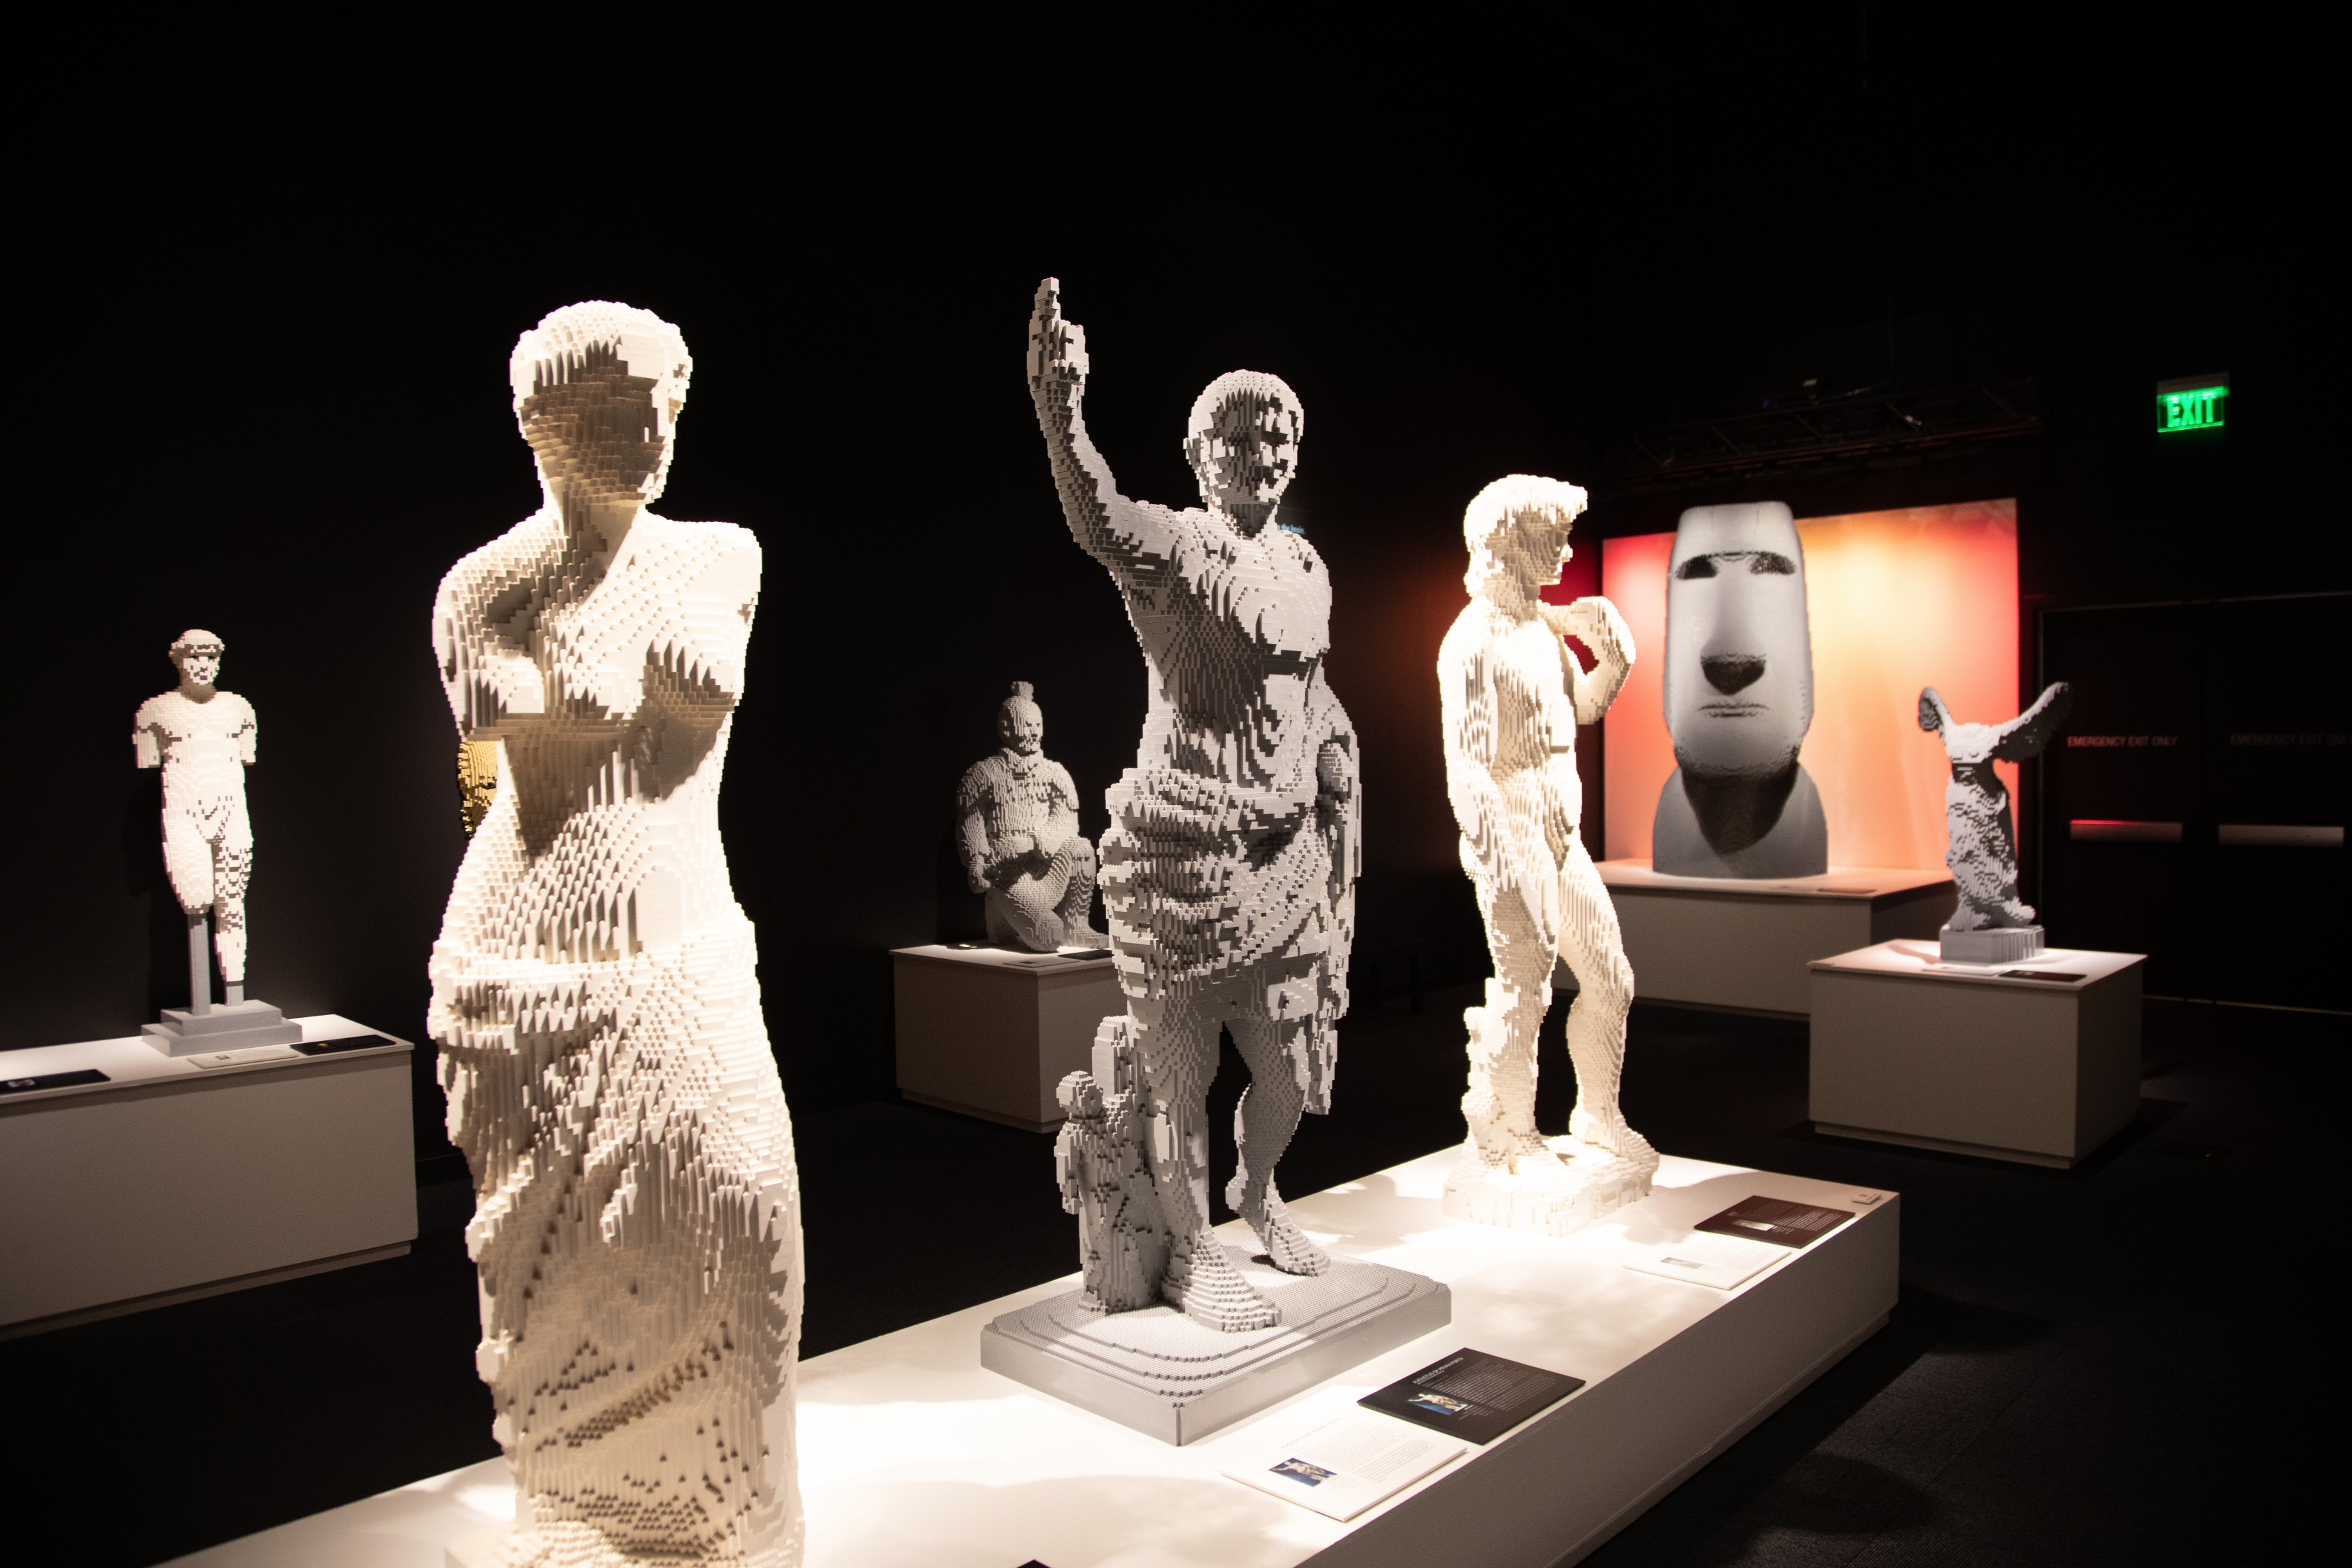 Alexandros of Antioch’s Venus de Milo, Augustus of Prima Porta, and Michelangelo’s David take center stage in the art history gallery of The Art of the Brick traveling exhibition (PHOTO CREDIT: JerSean Golatt/Perot Museum of Nature and Science)